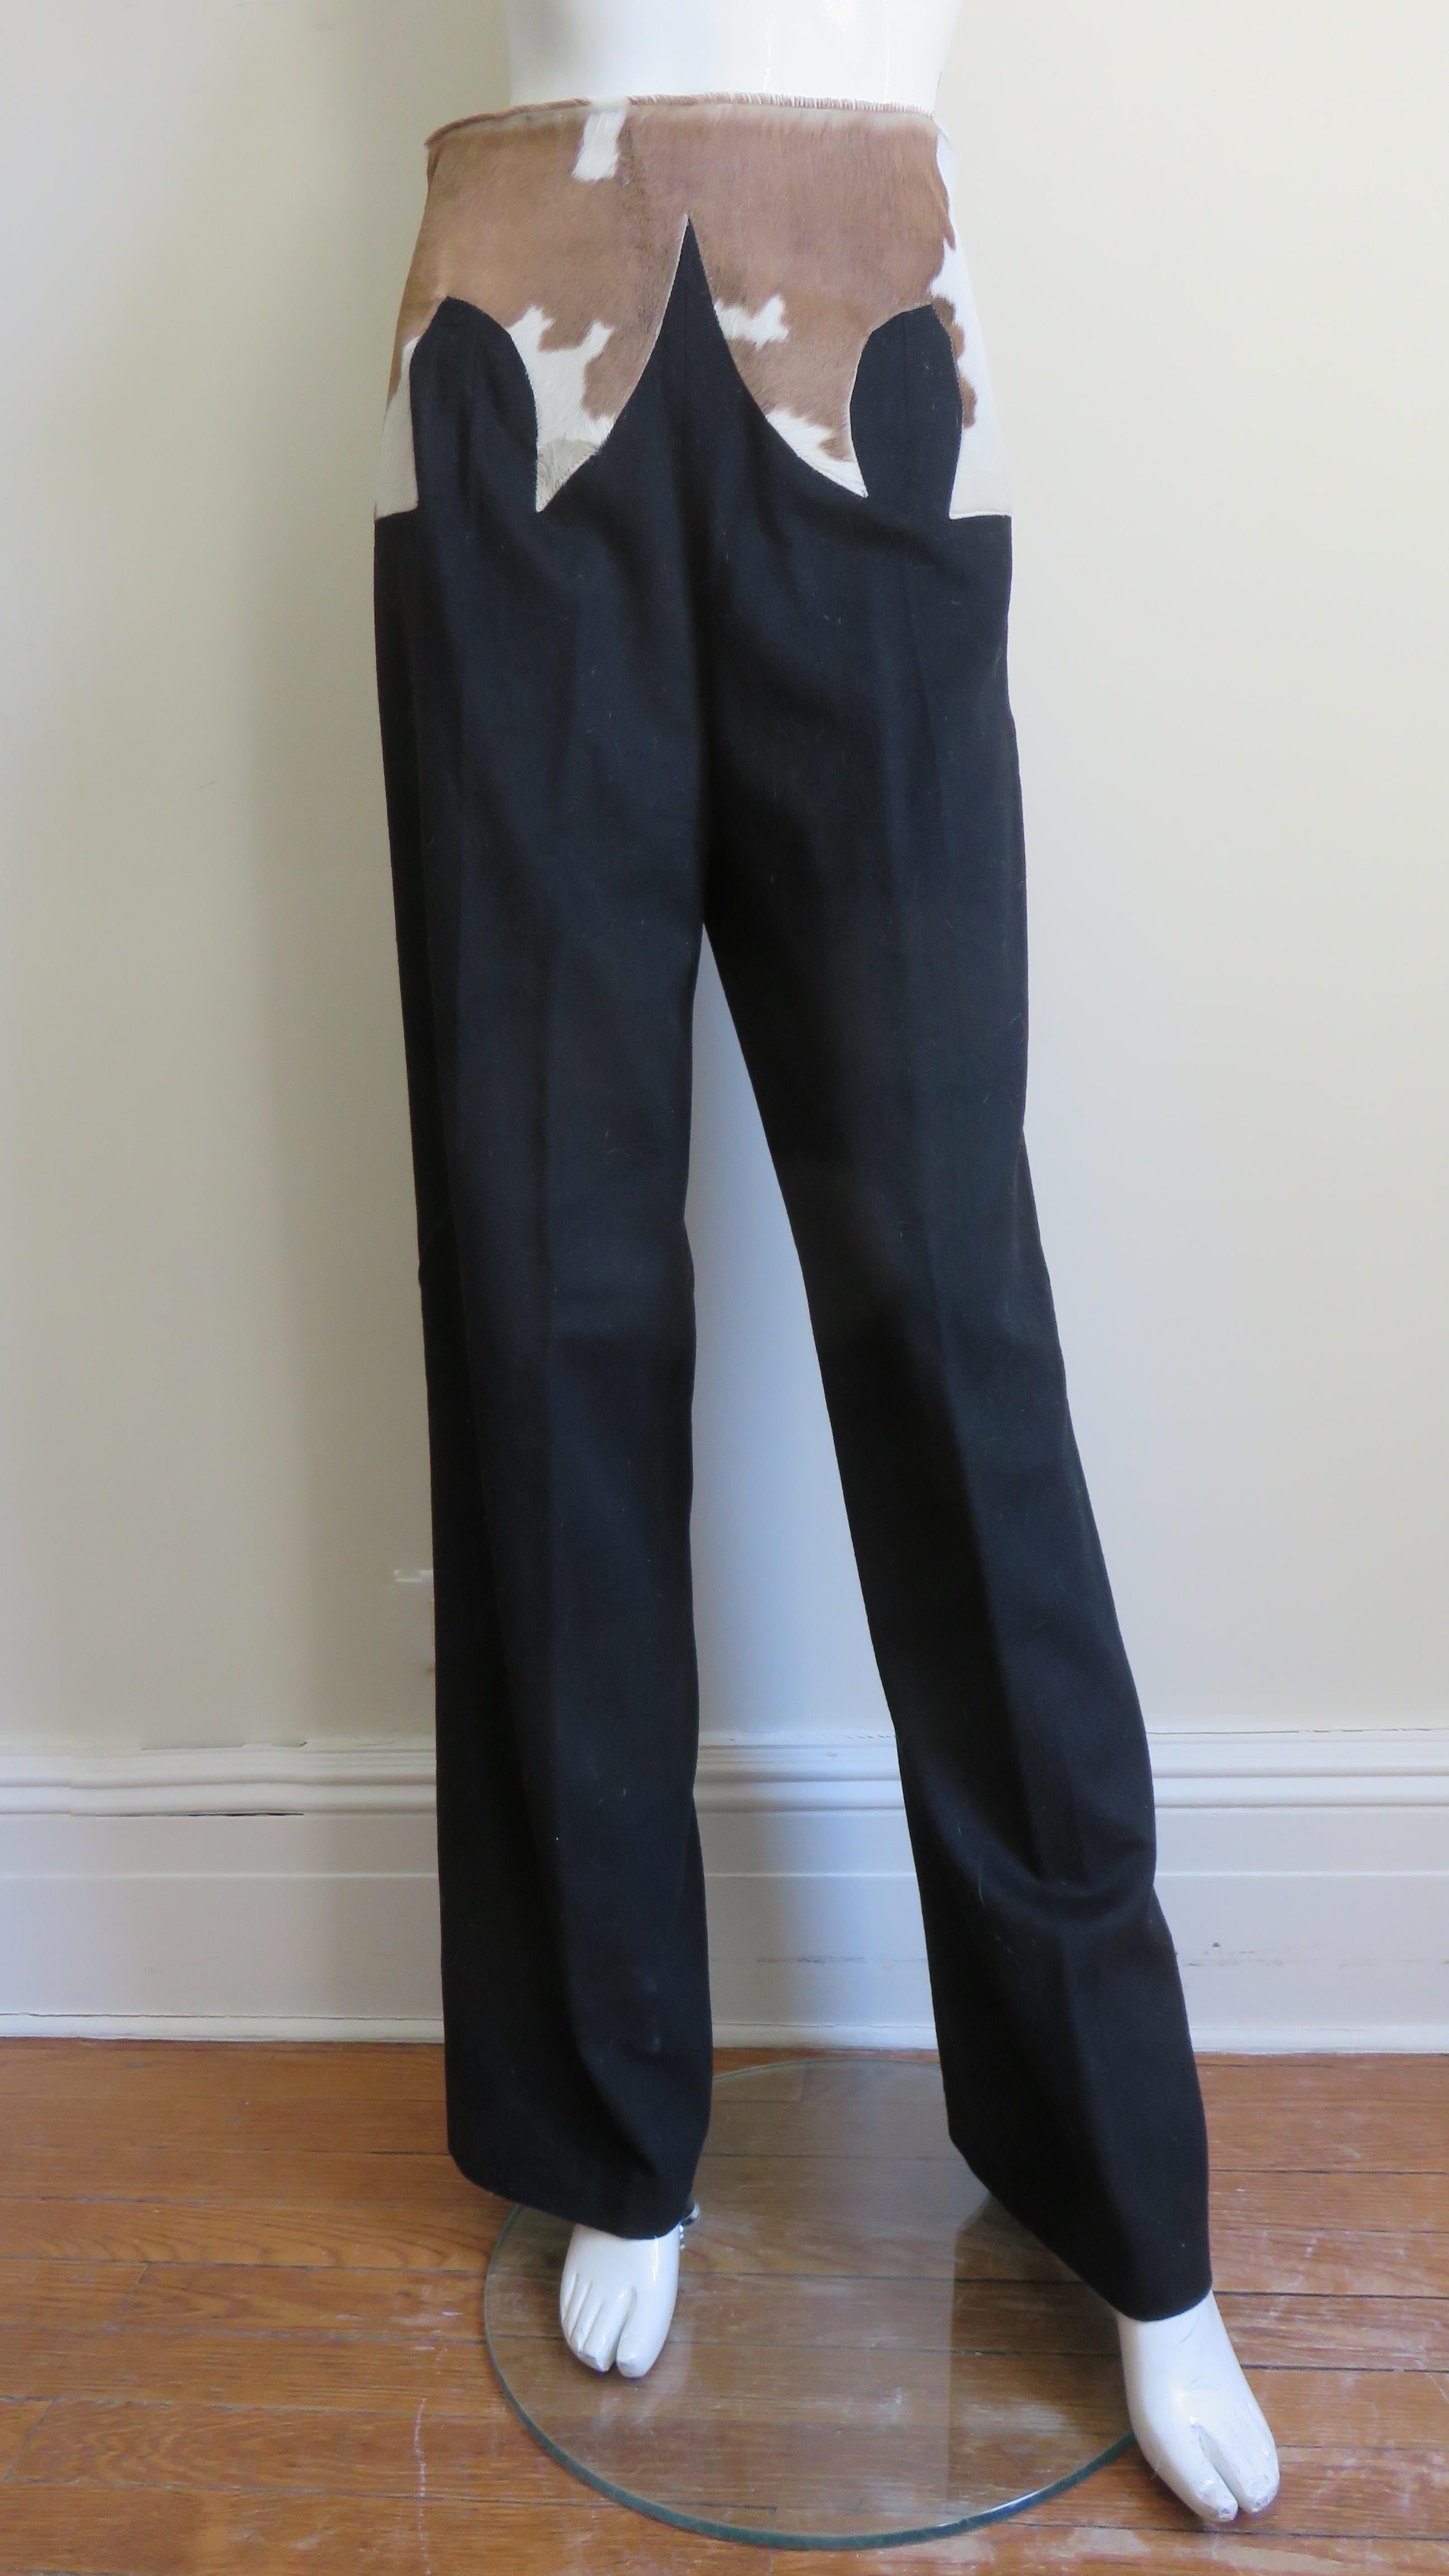 Alexander McQueen Iconic Cowhide Waist Pants F/W 1997 In Good Condition For Sale In Water Mill, NY